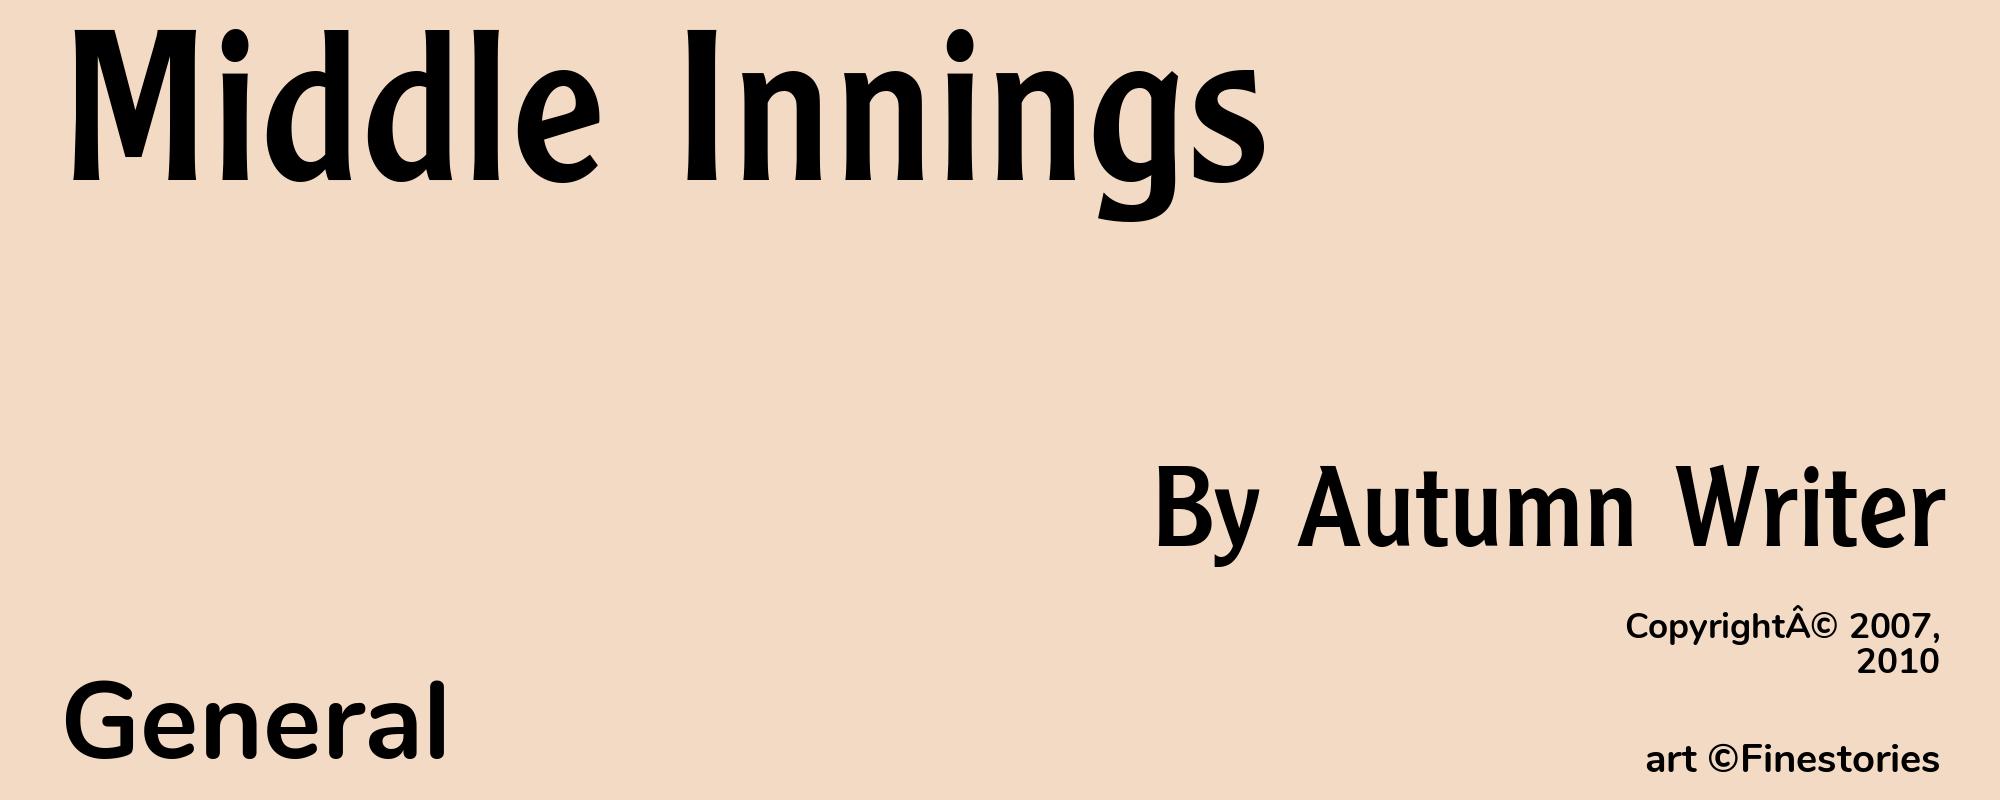 Middle Innings - Cover